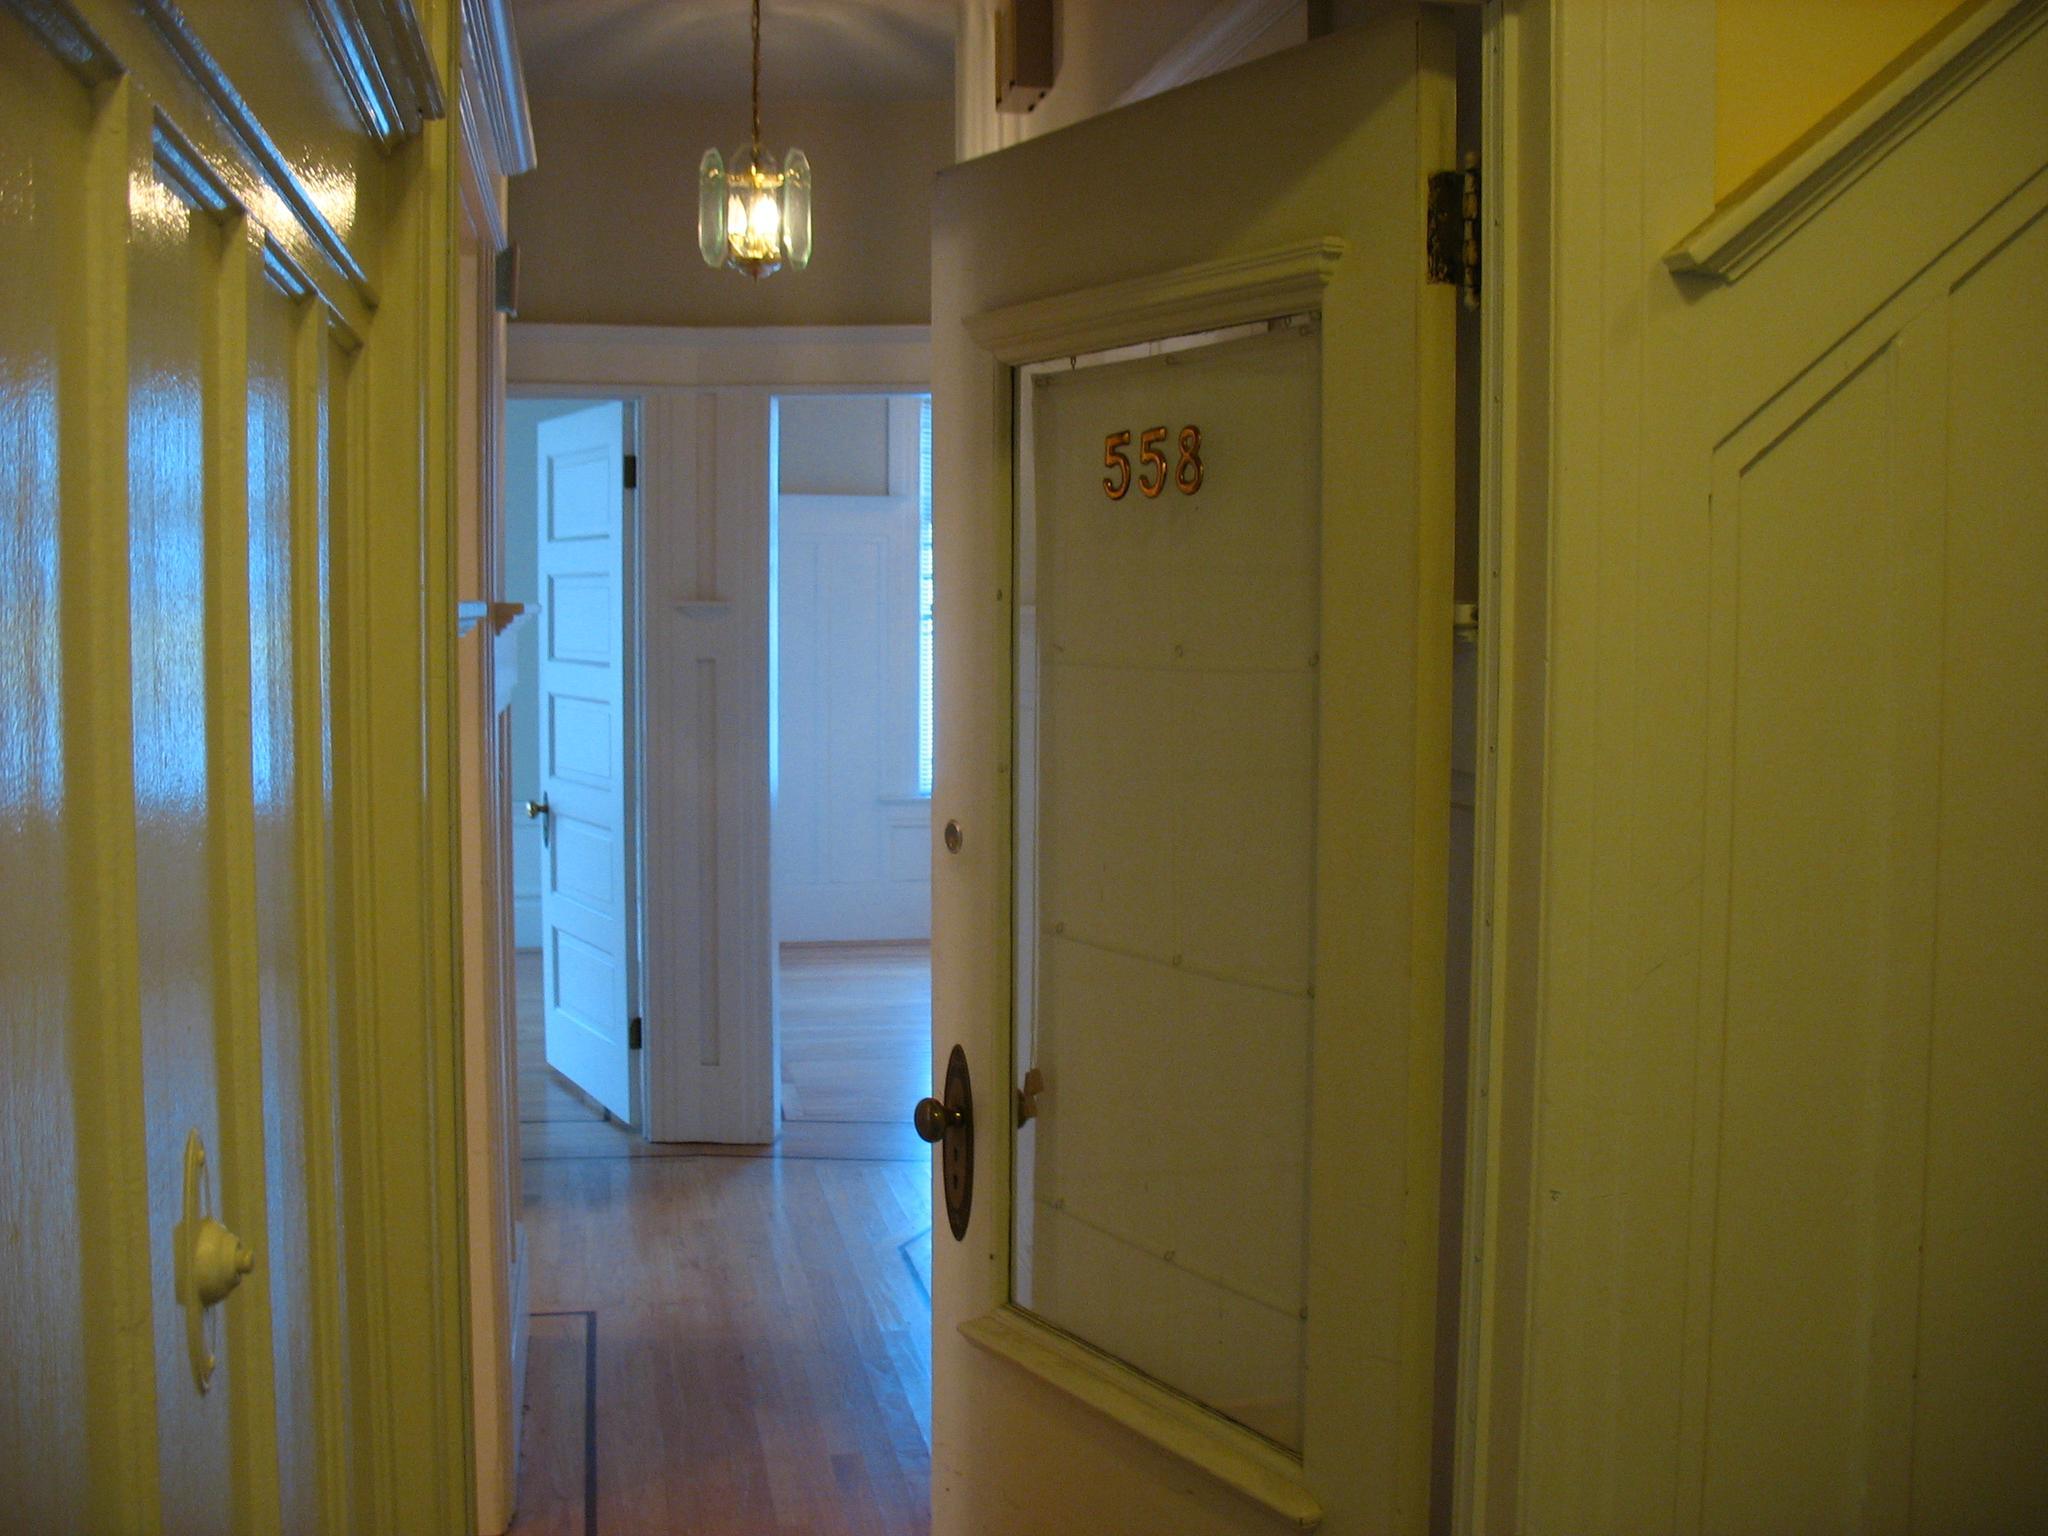 a house hallway with yellow painted walls and white doors